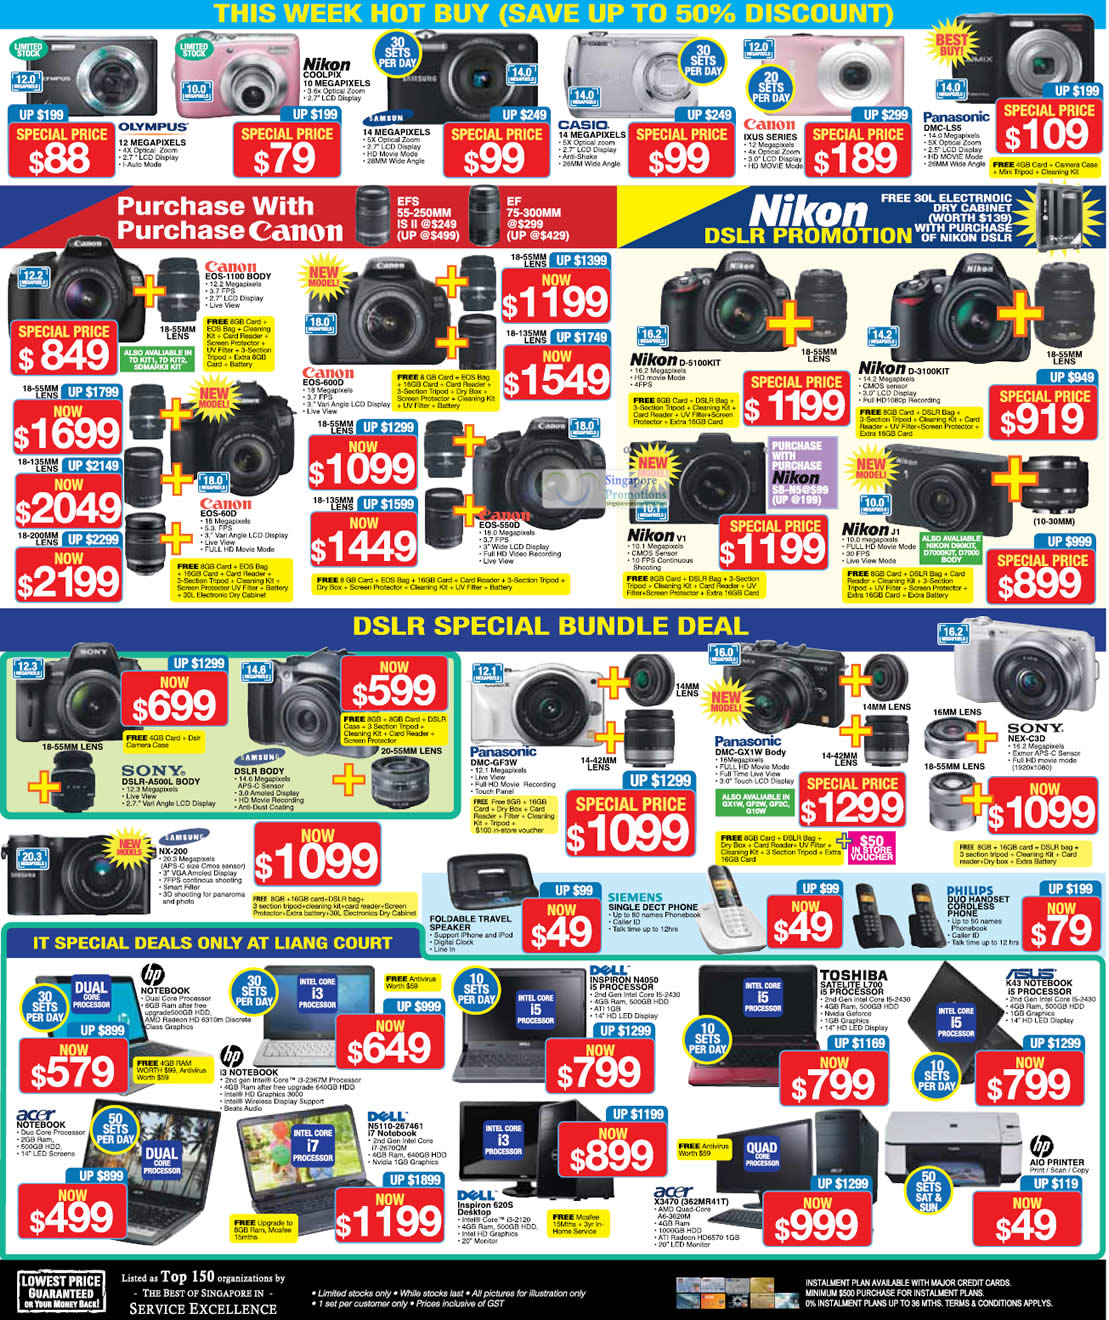 Featured image for Audio House TV, Digital Cameras, Notebooks & Appliances Offers 9 - 11 Mar 2012